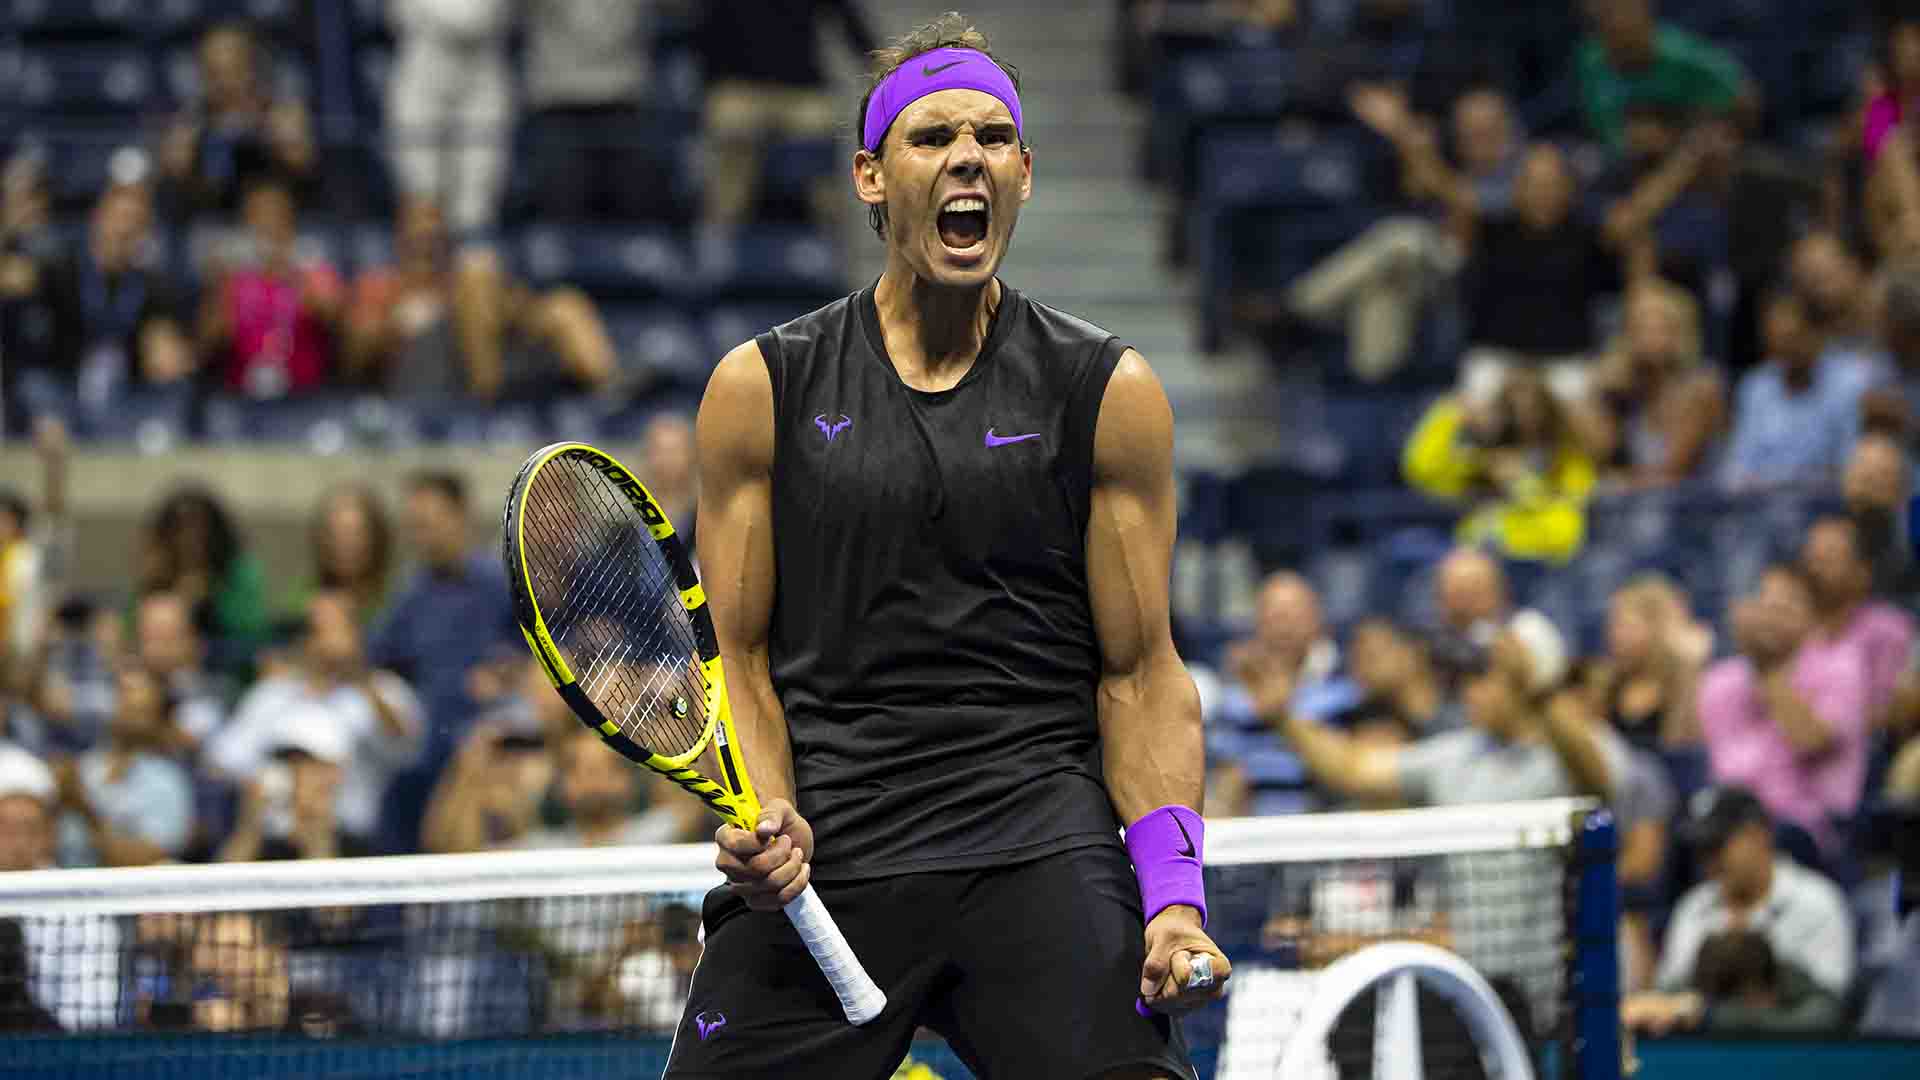 Rafael Nadal outlasts Daniil Medvedev 7-5, 6-3, 5-7, 4-6, 6-4 in four hours and 51 minutes to tie John McEnroe’s mark of four US Open titles.